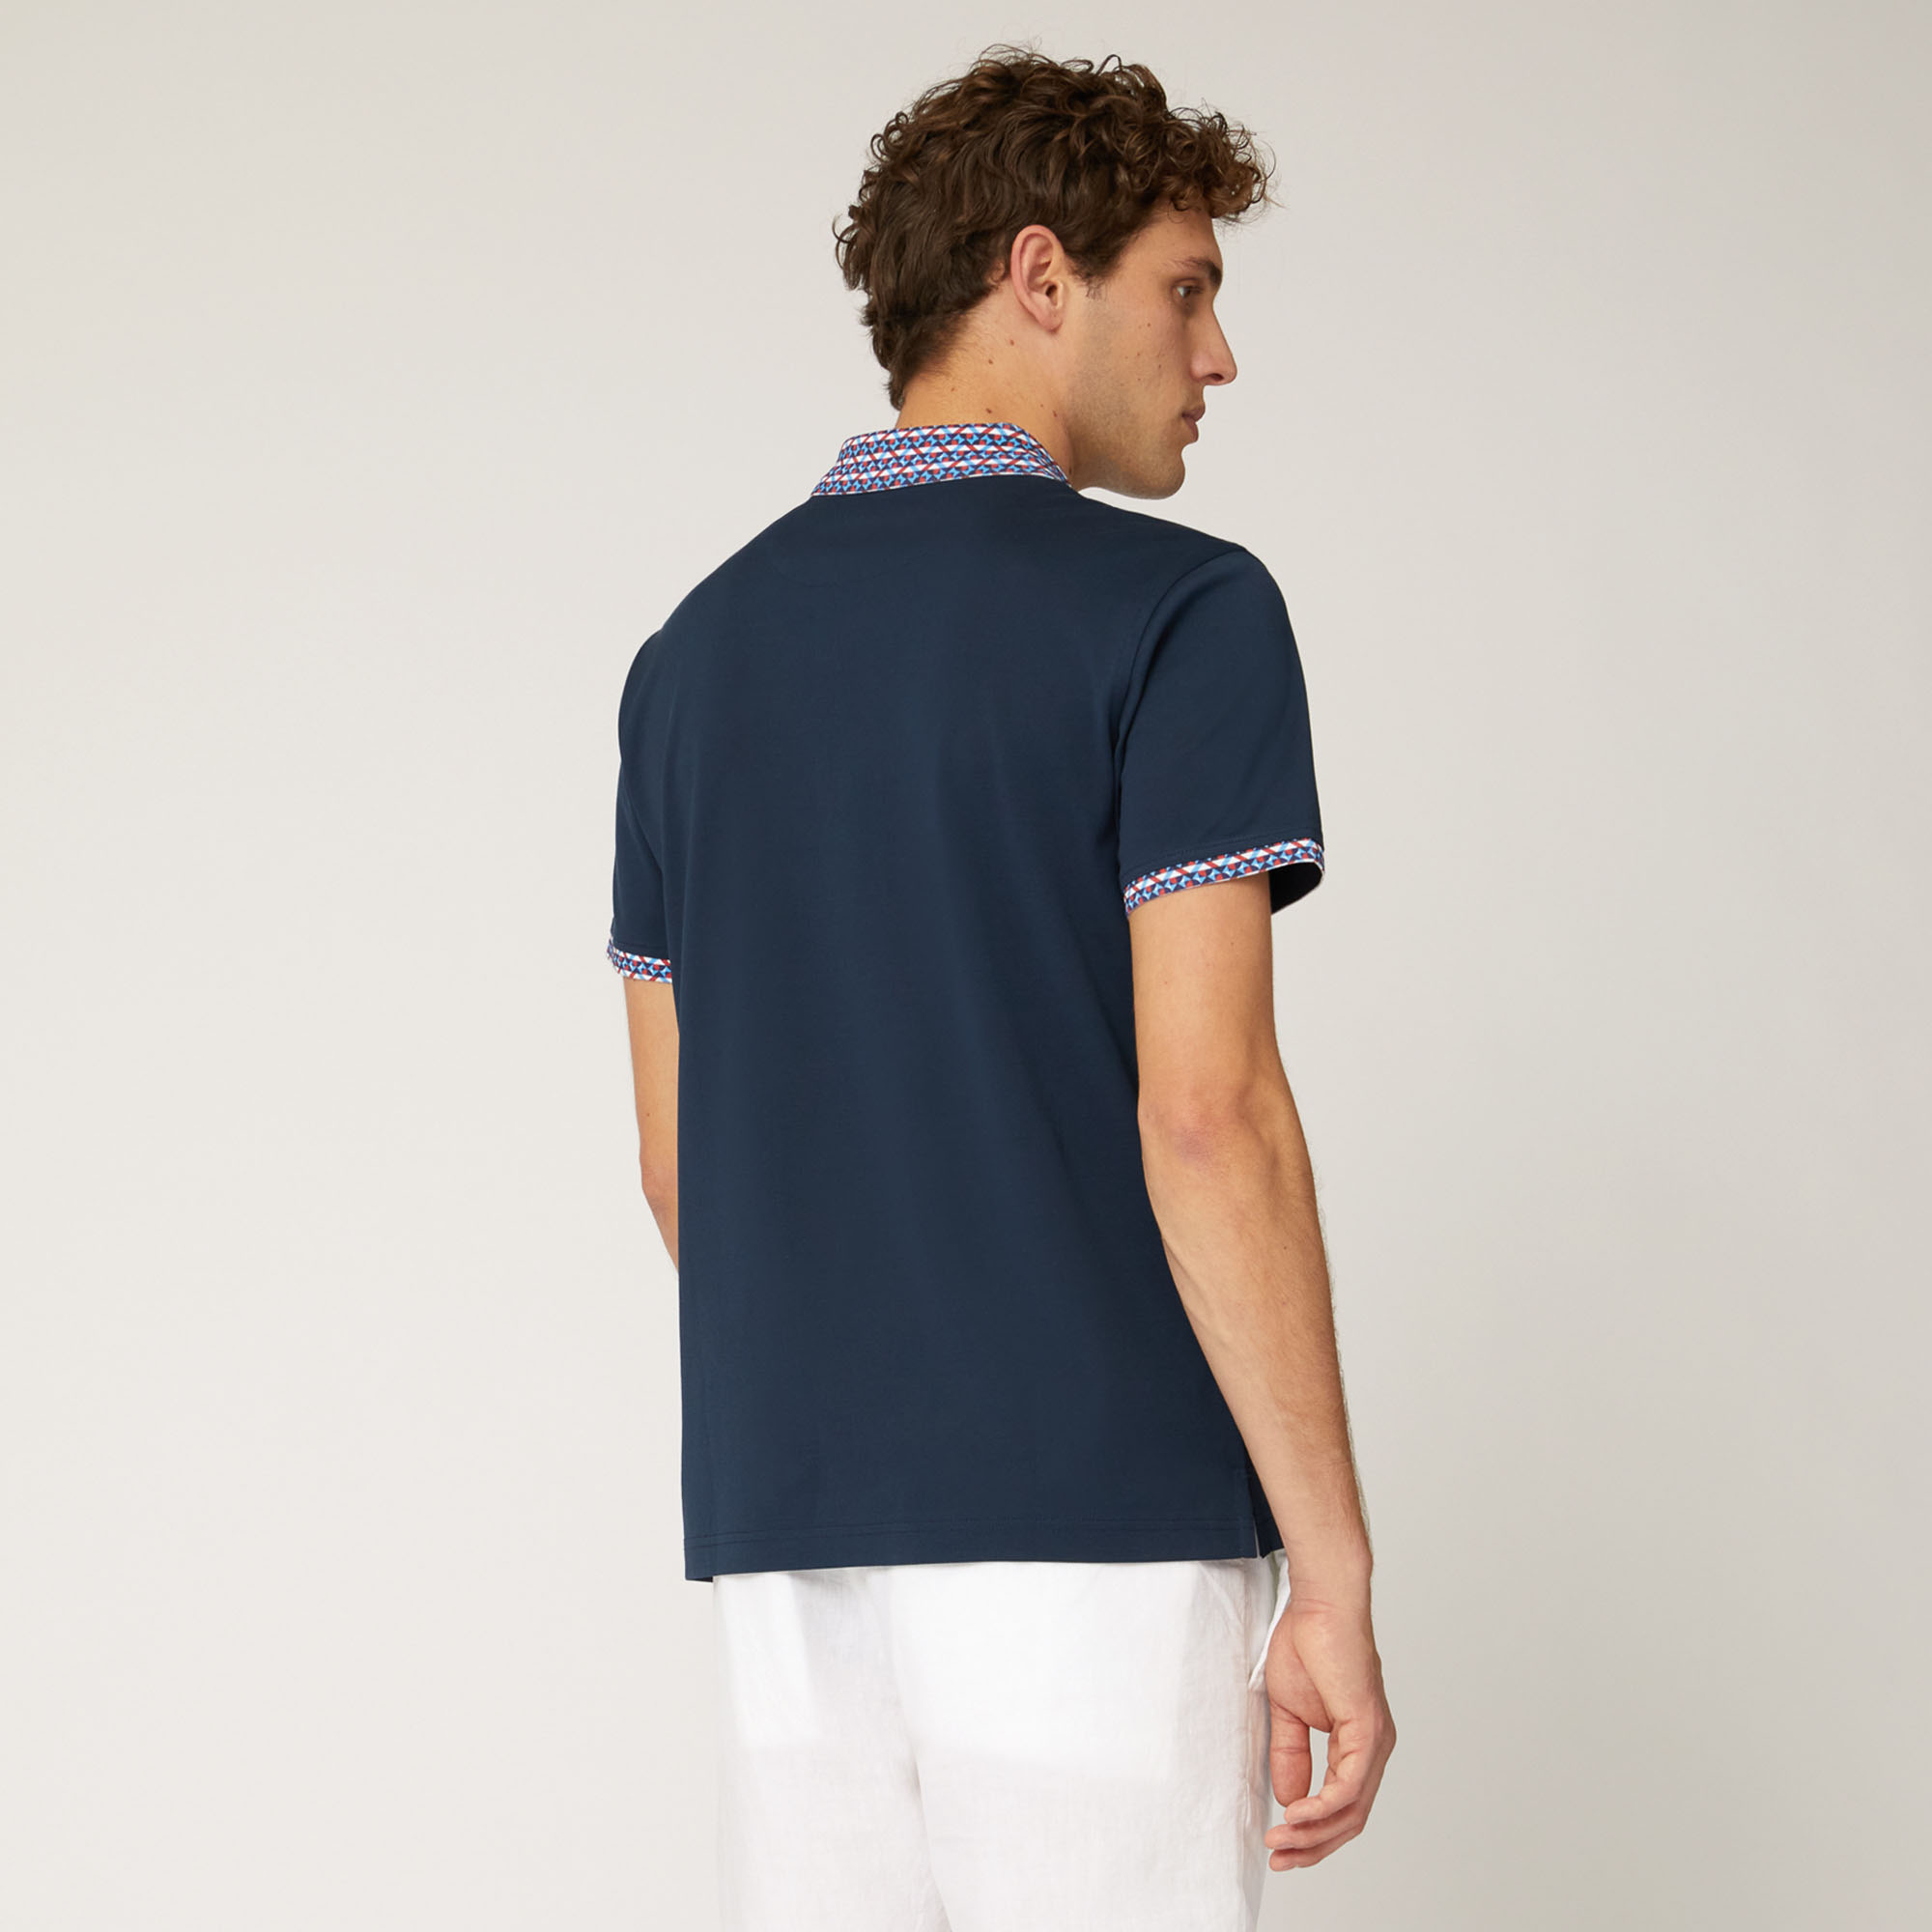 Polo Con Stampa A Contrasto, Blu Navy, large image number 1